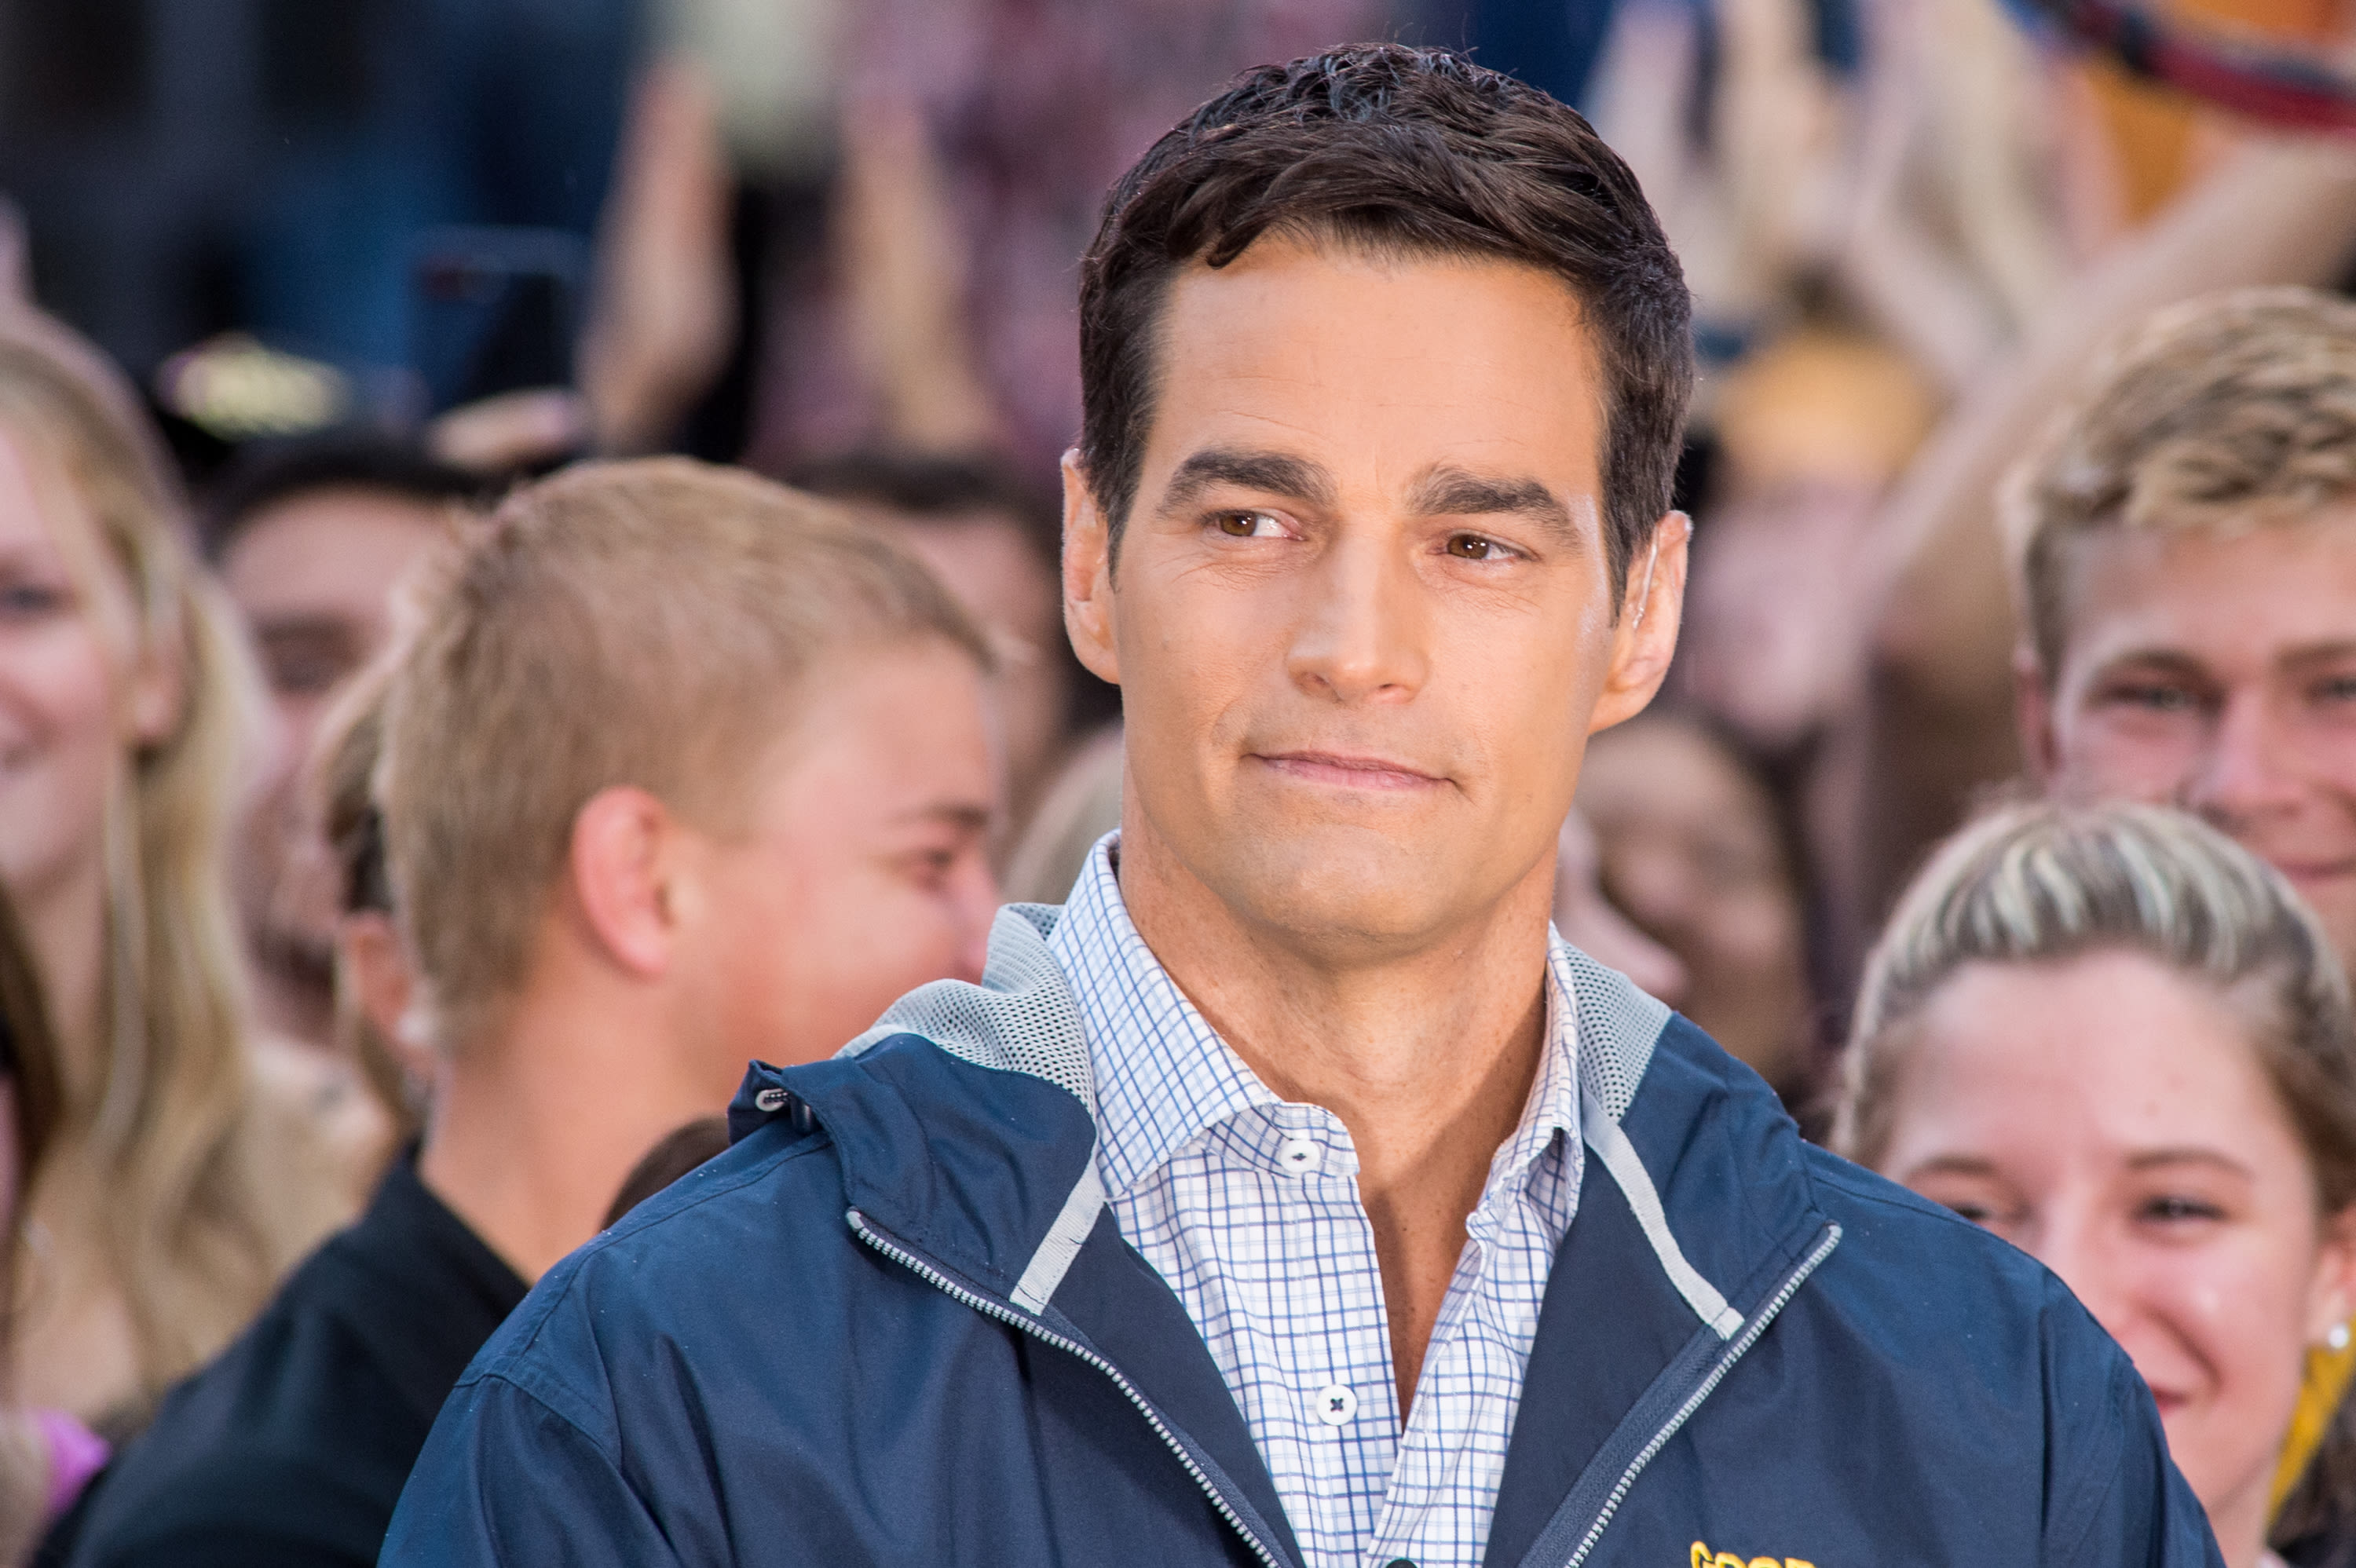 Was Good Morning America’s Rob Marciano Fired From the Show? Inside His ABC Exit